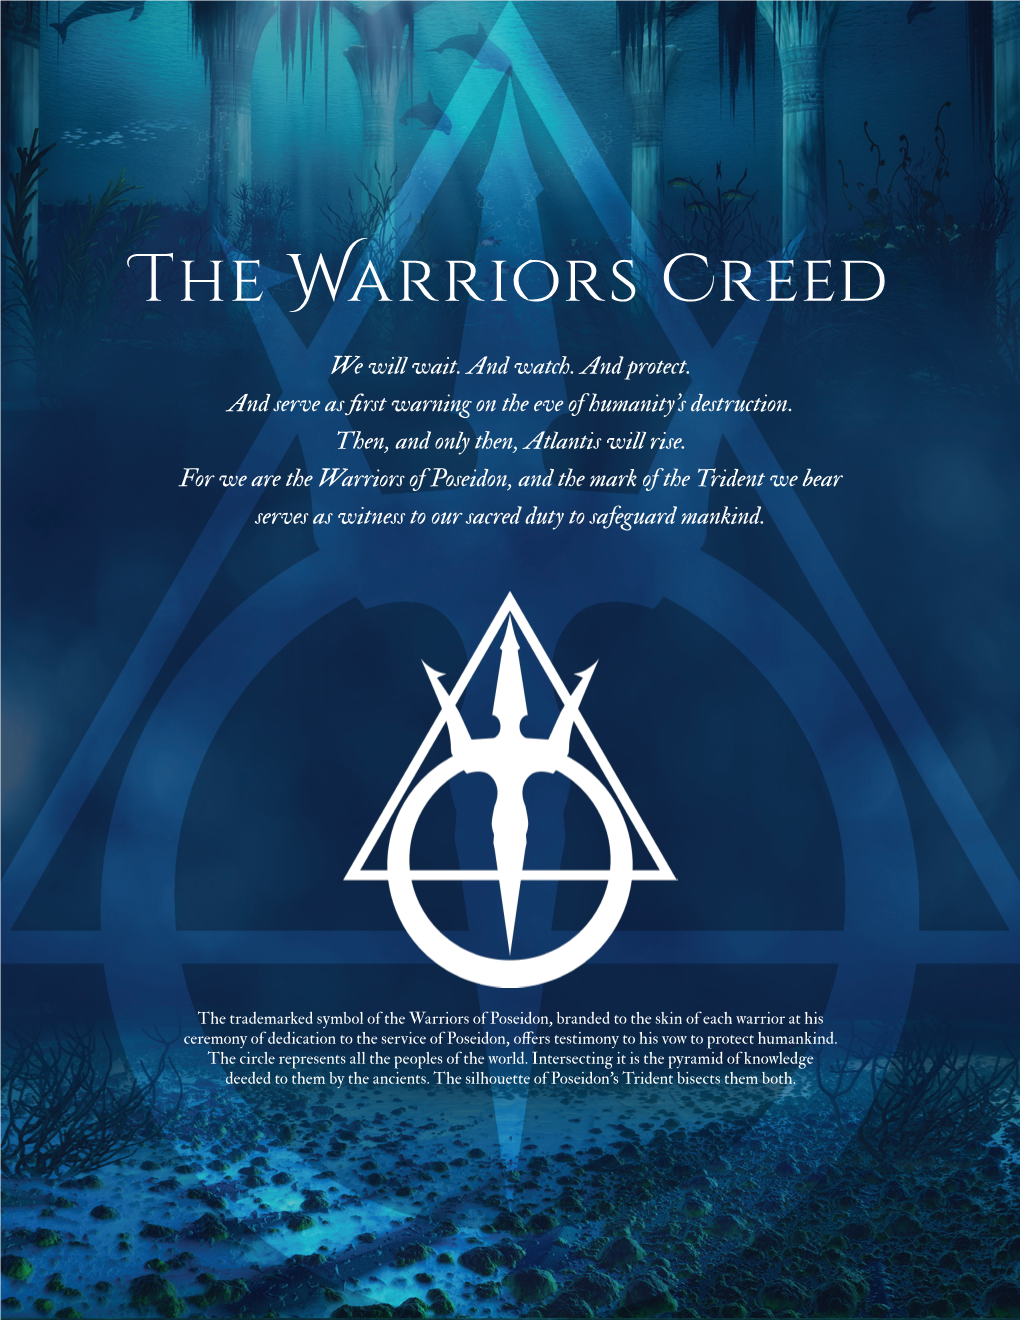 The Warriors Creed